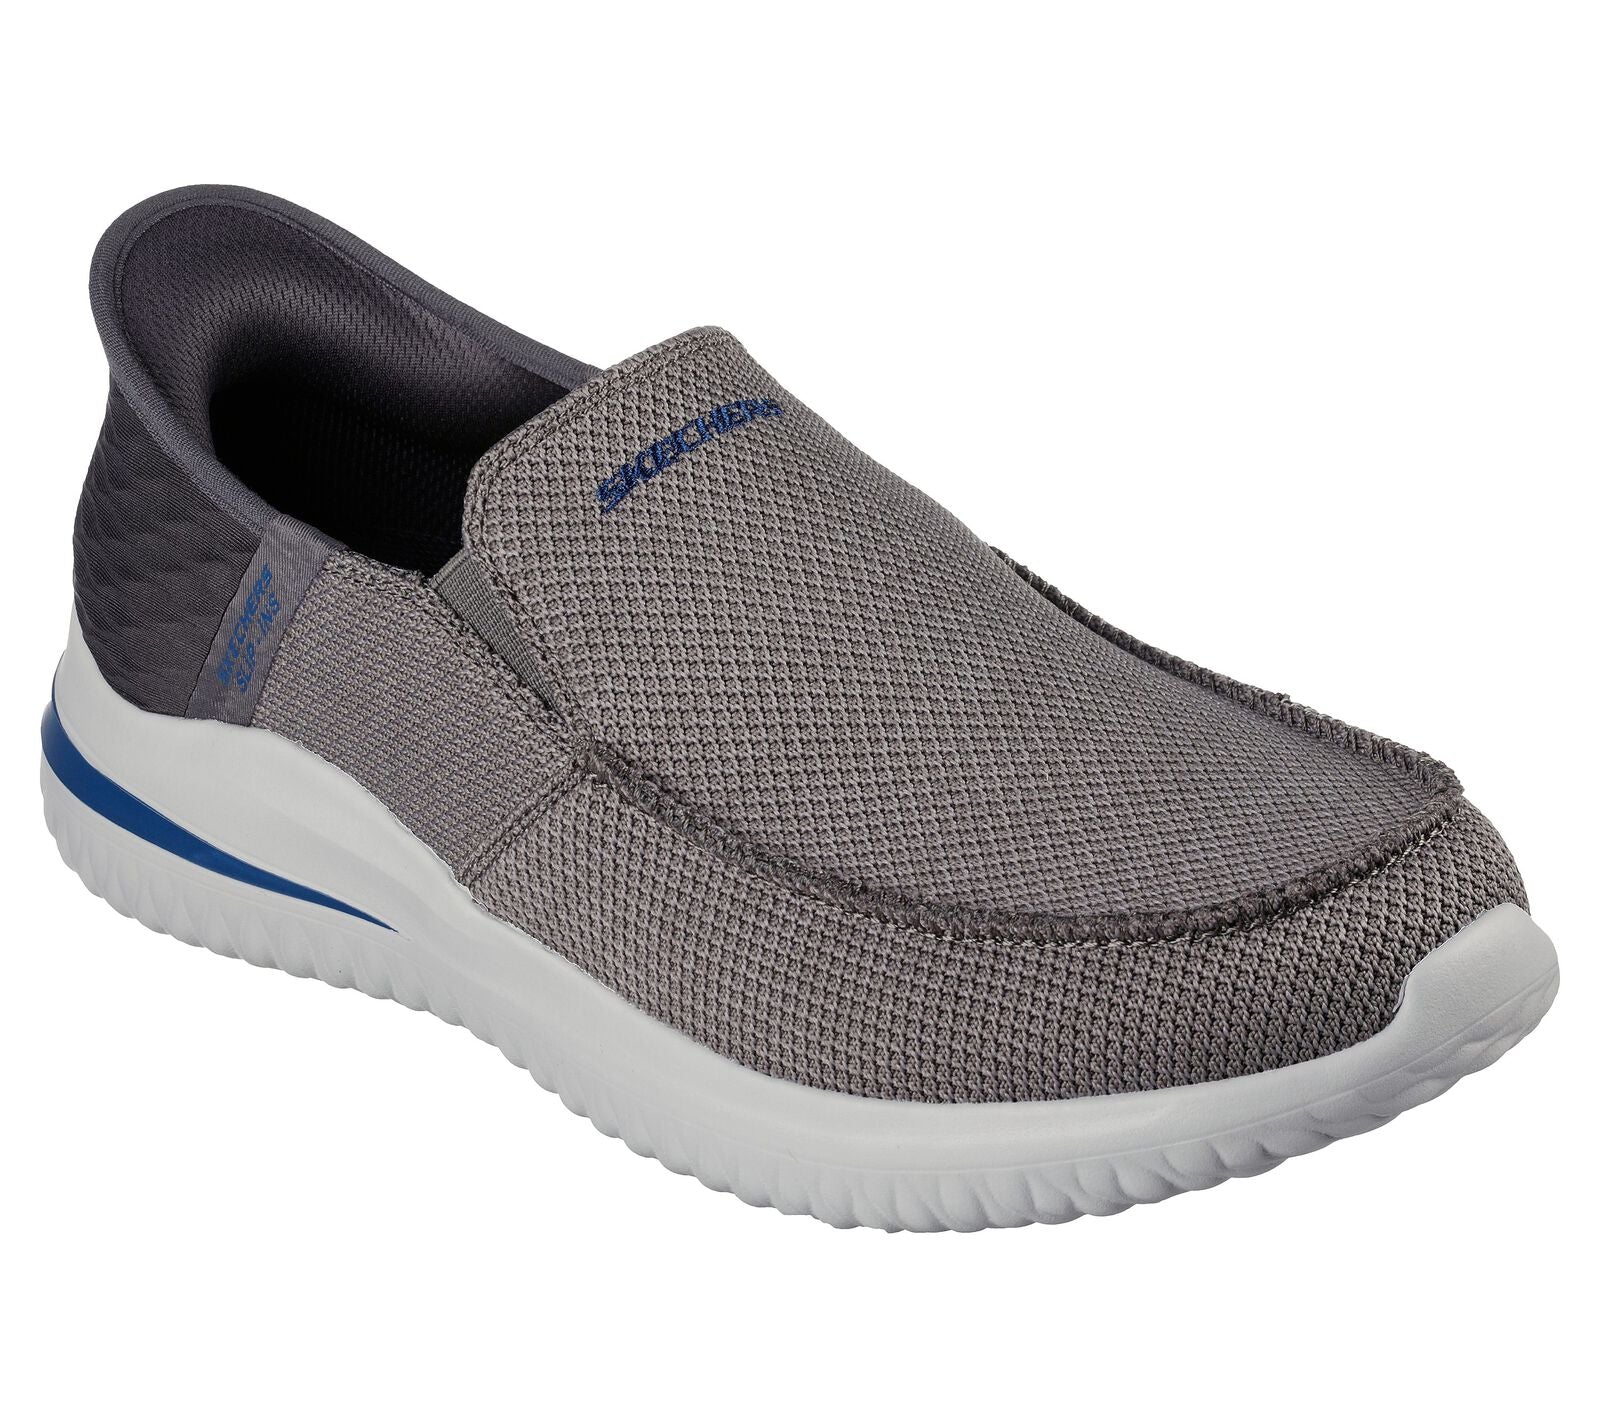 Skechers 210604 Delson 3.0 Cabrino Mens Grey Textile Vegan Arch Support Slip On Trainers